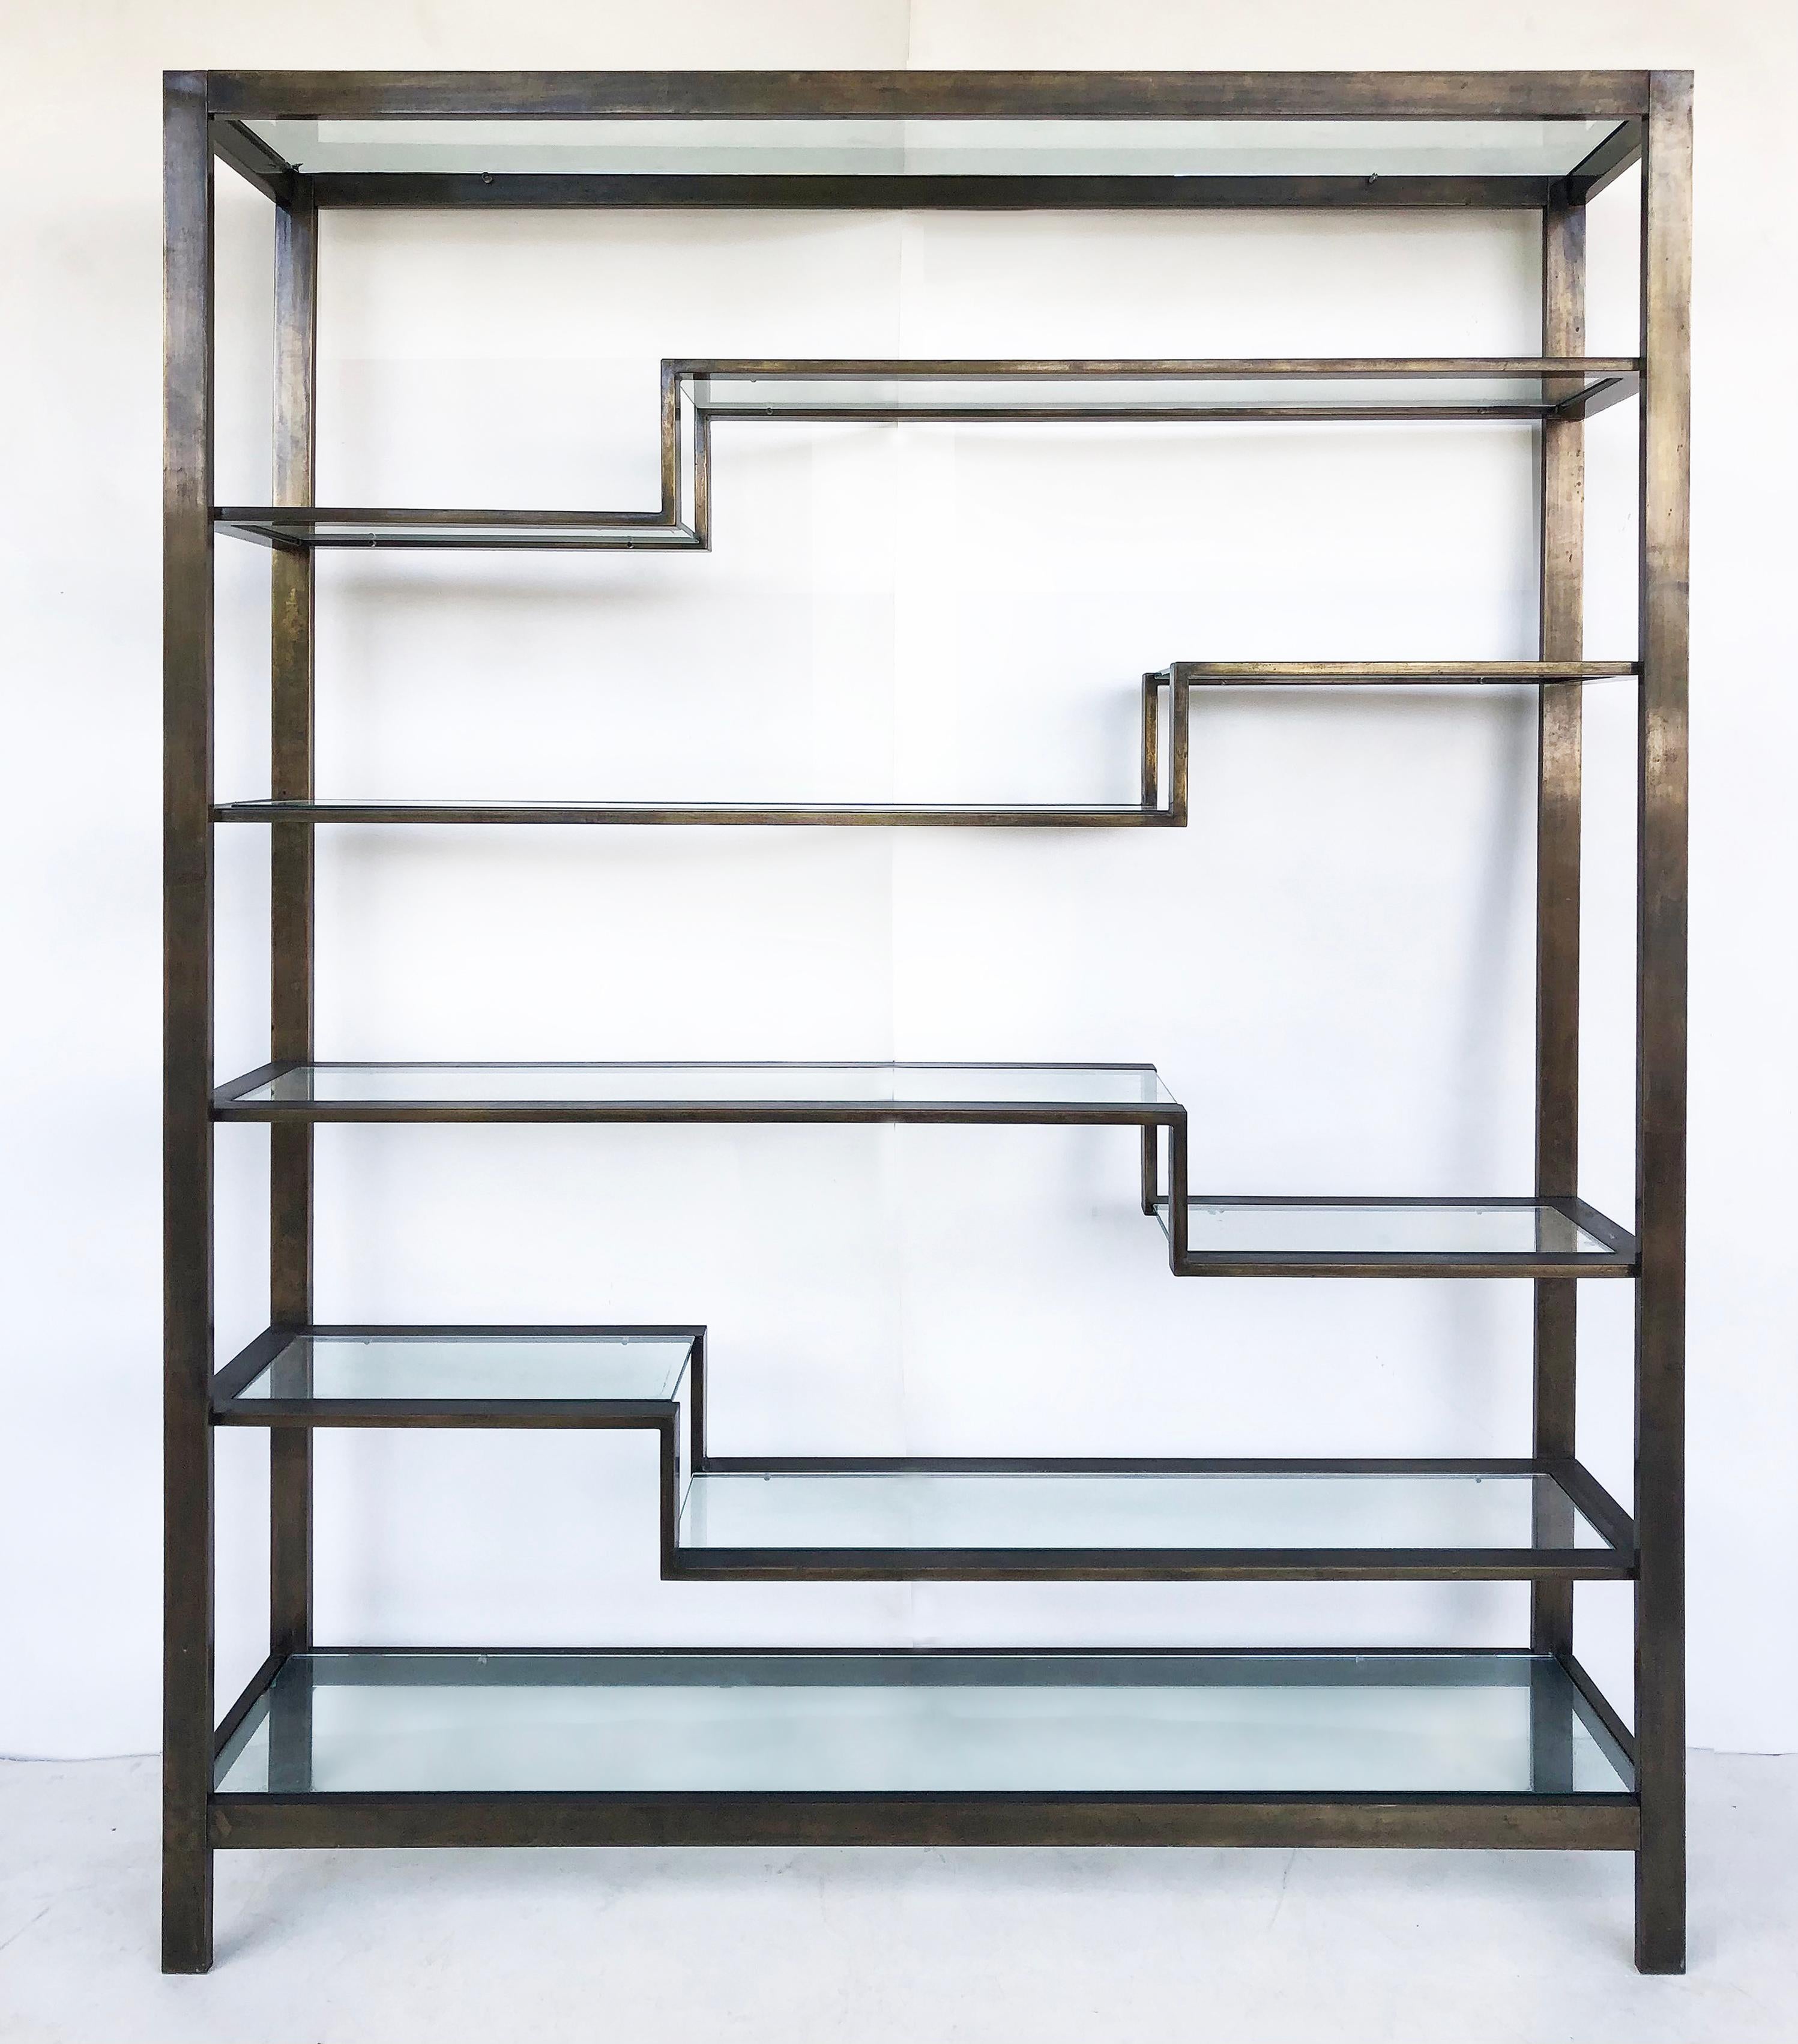 Bronzed Finish Mid-Century Modern Etagere Metal Shelving with Glass Shelves 1